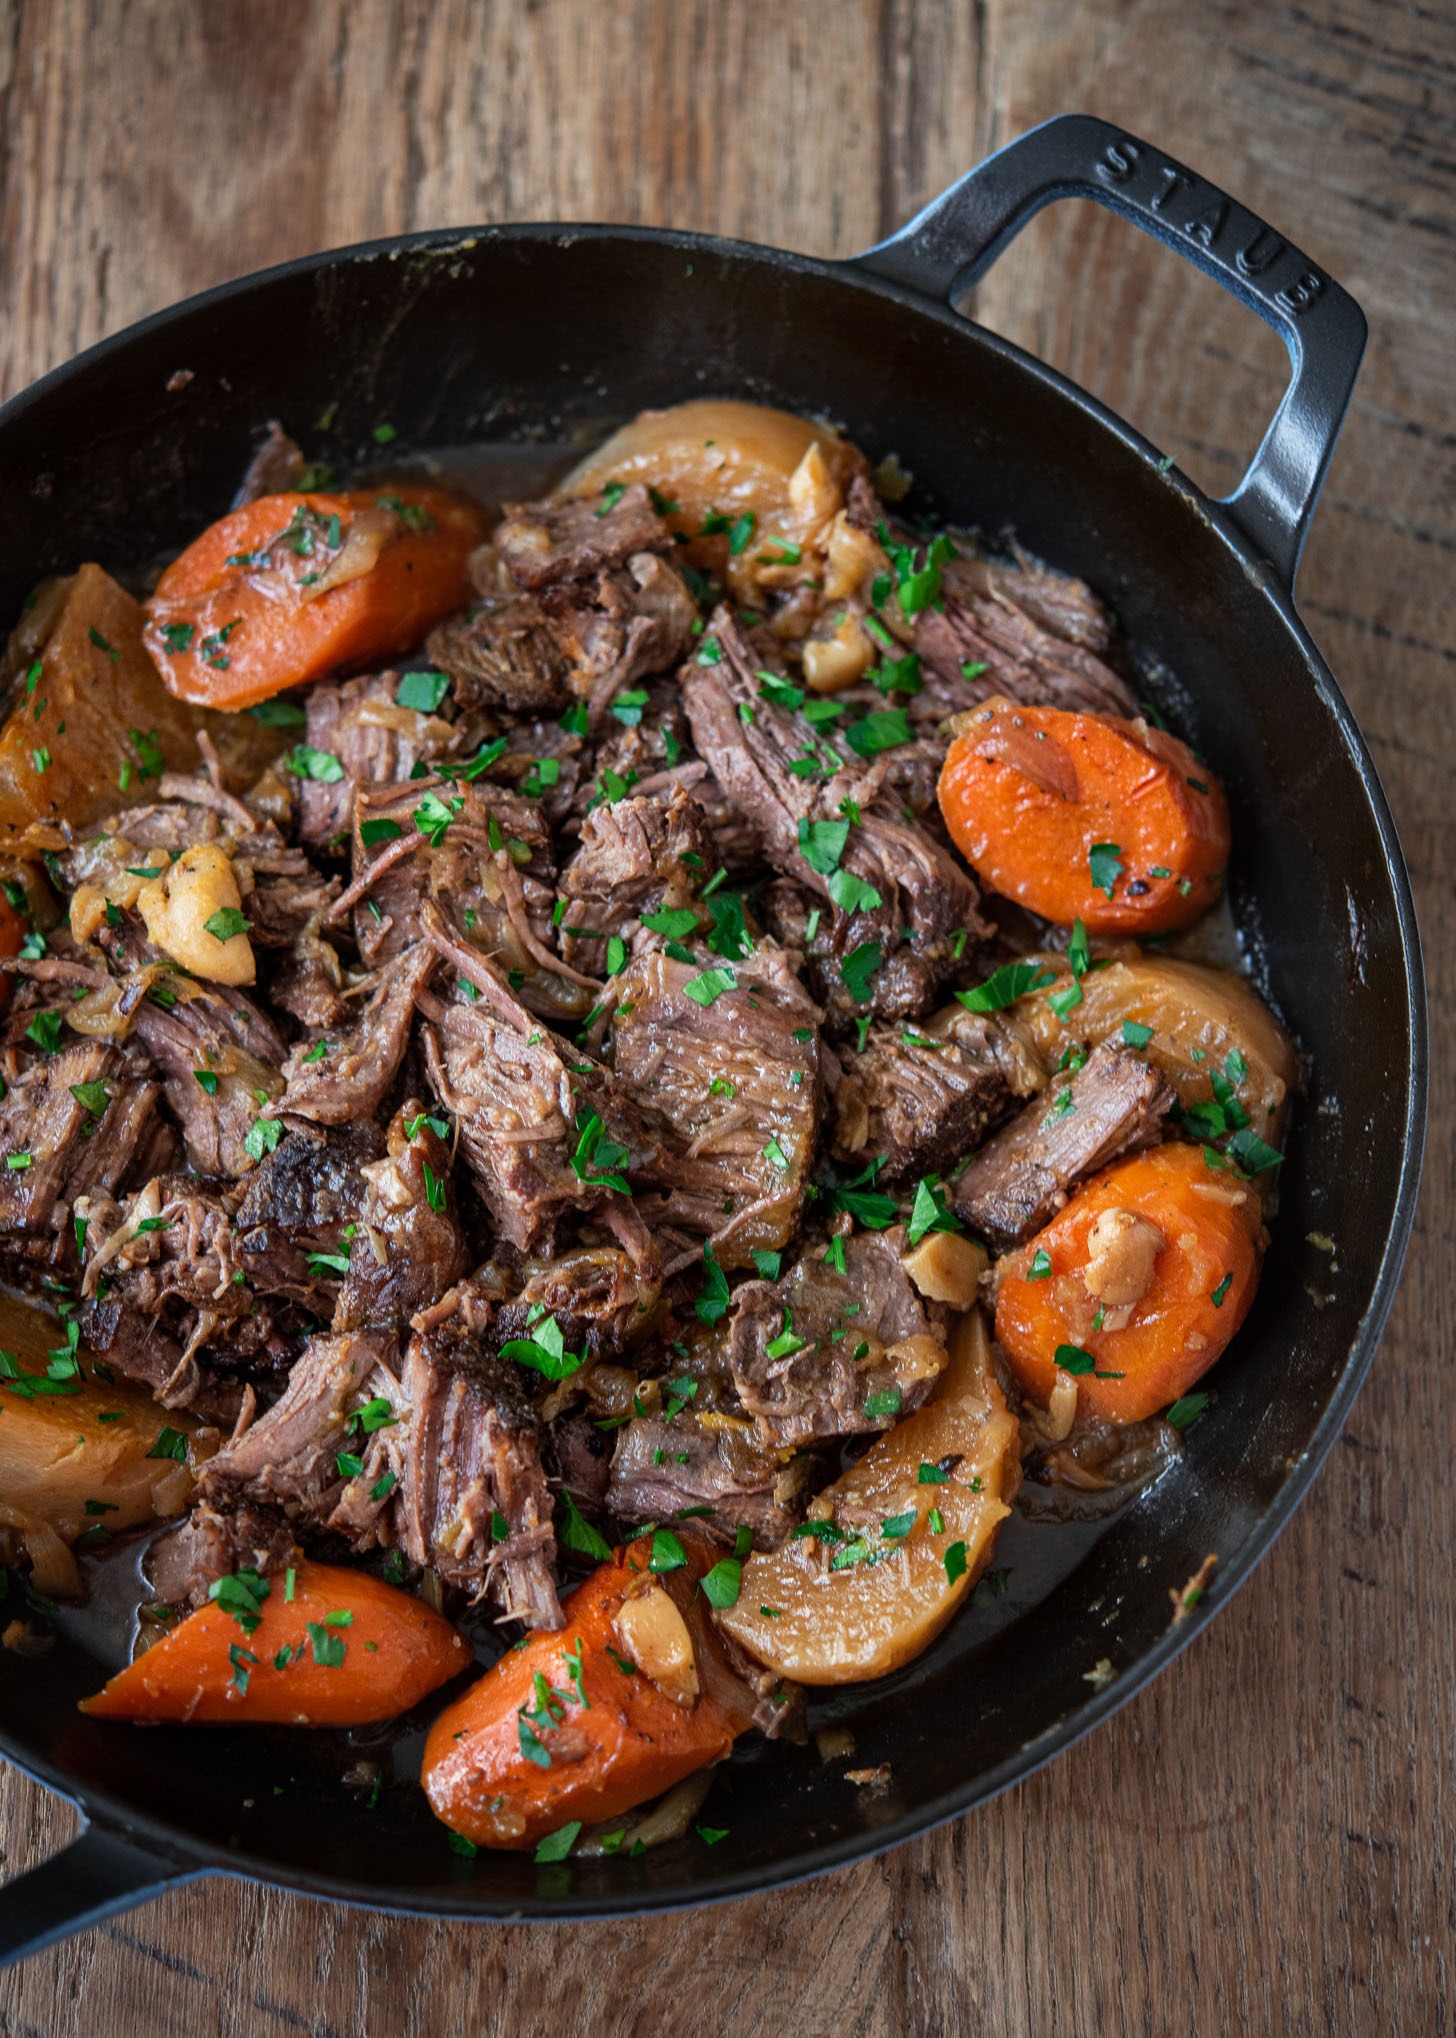 Spiced beef pot roast with onion, carrot, and turnip is arranged in a braising pan.